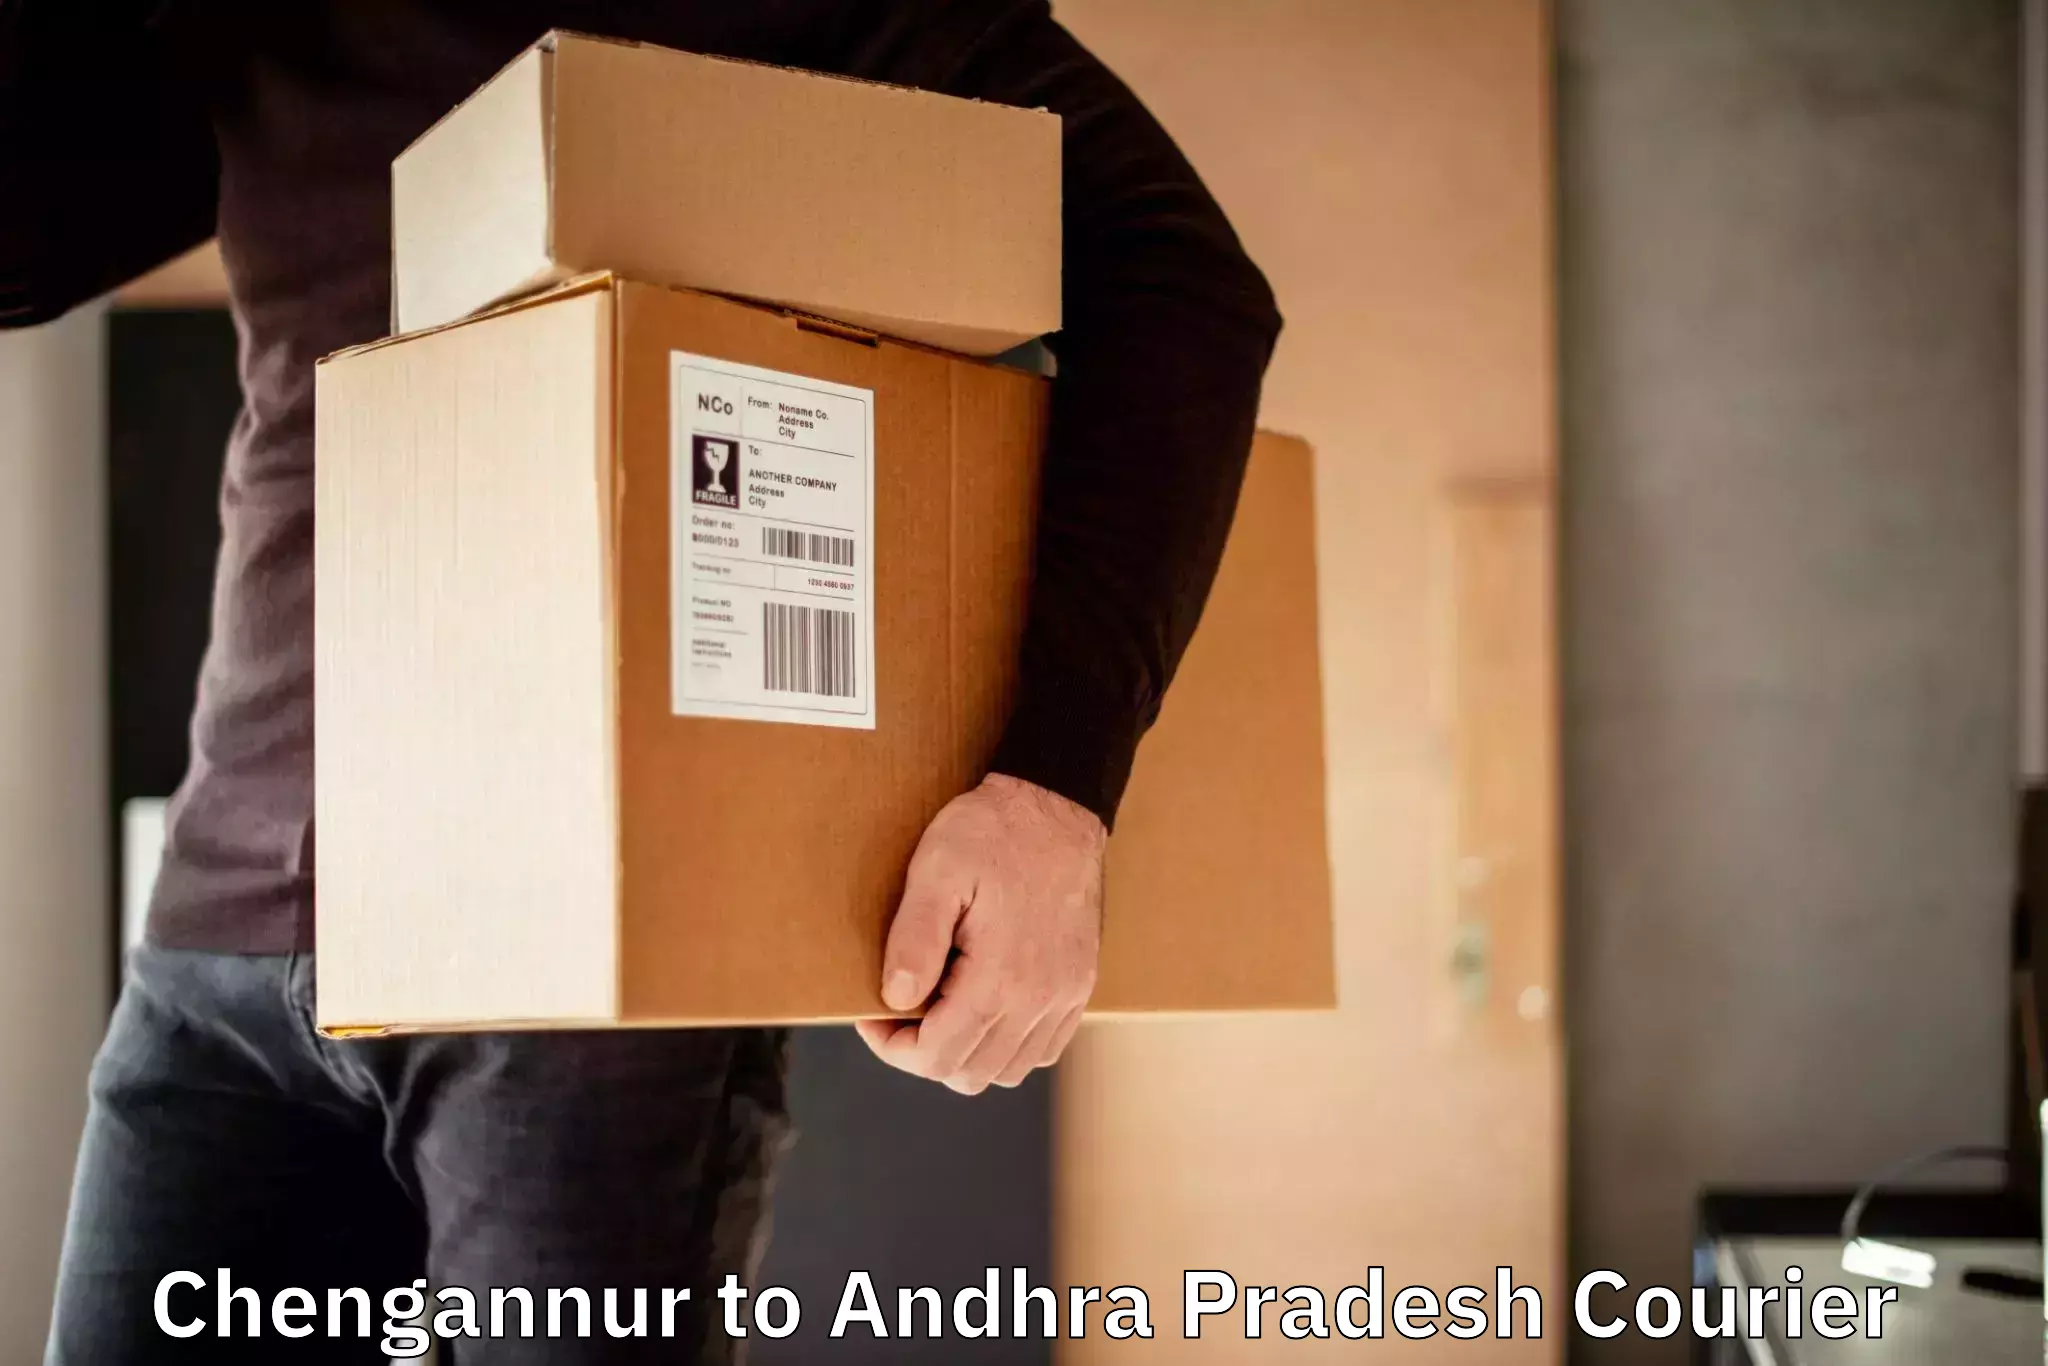 Tech-enabled shipping Chengannur to Madanapalle